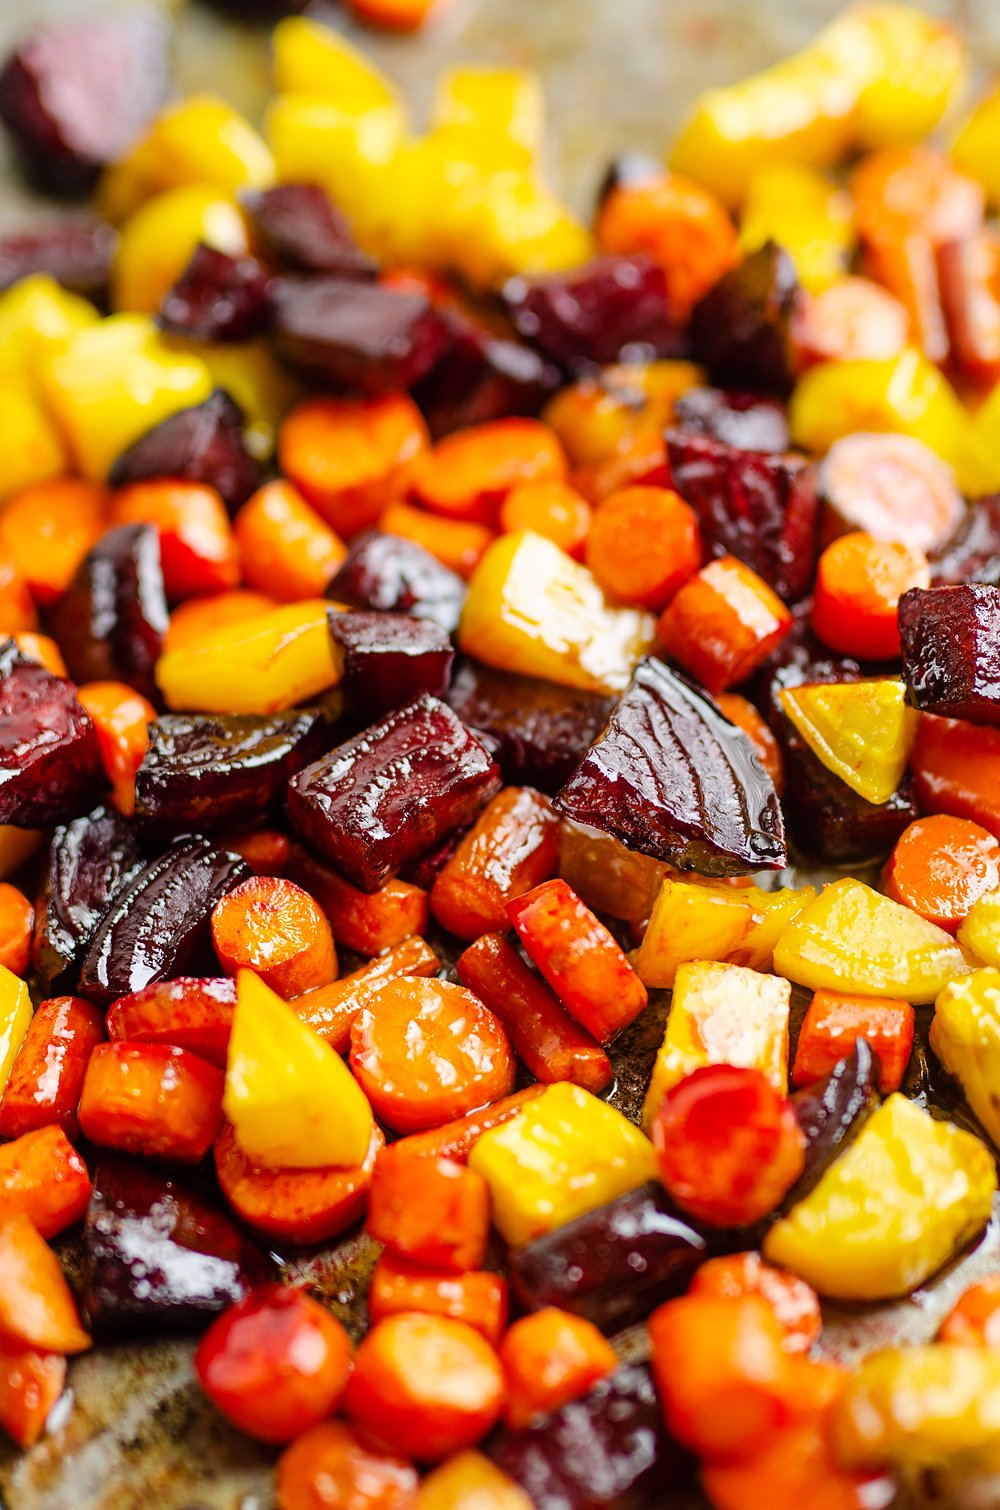 Beets and Carrots with Honey Balsamic Glaze: